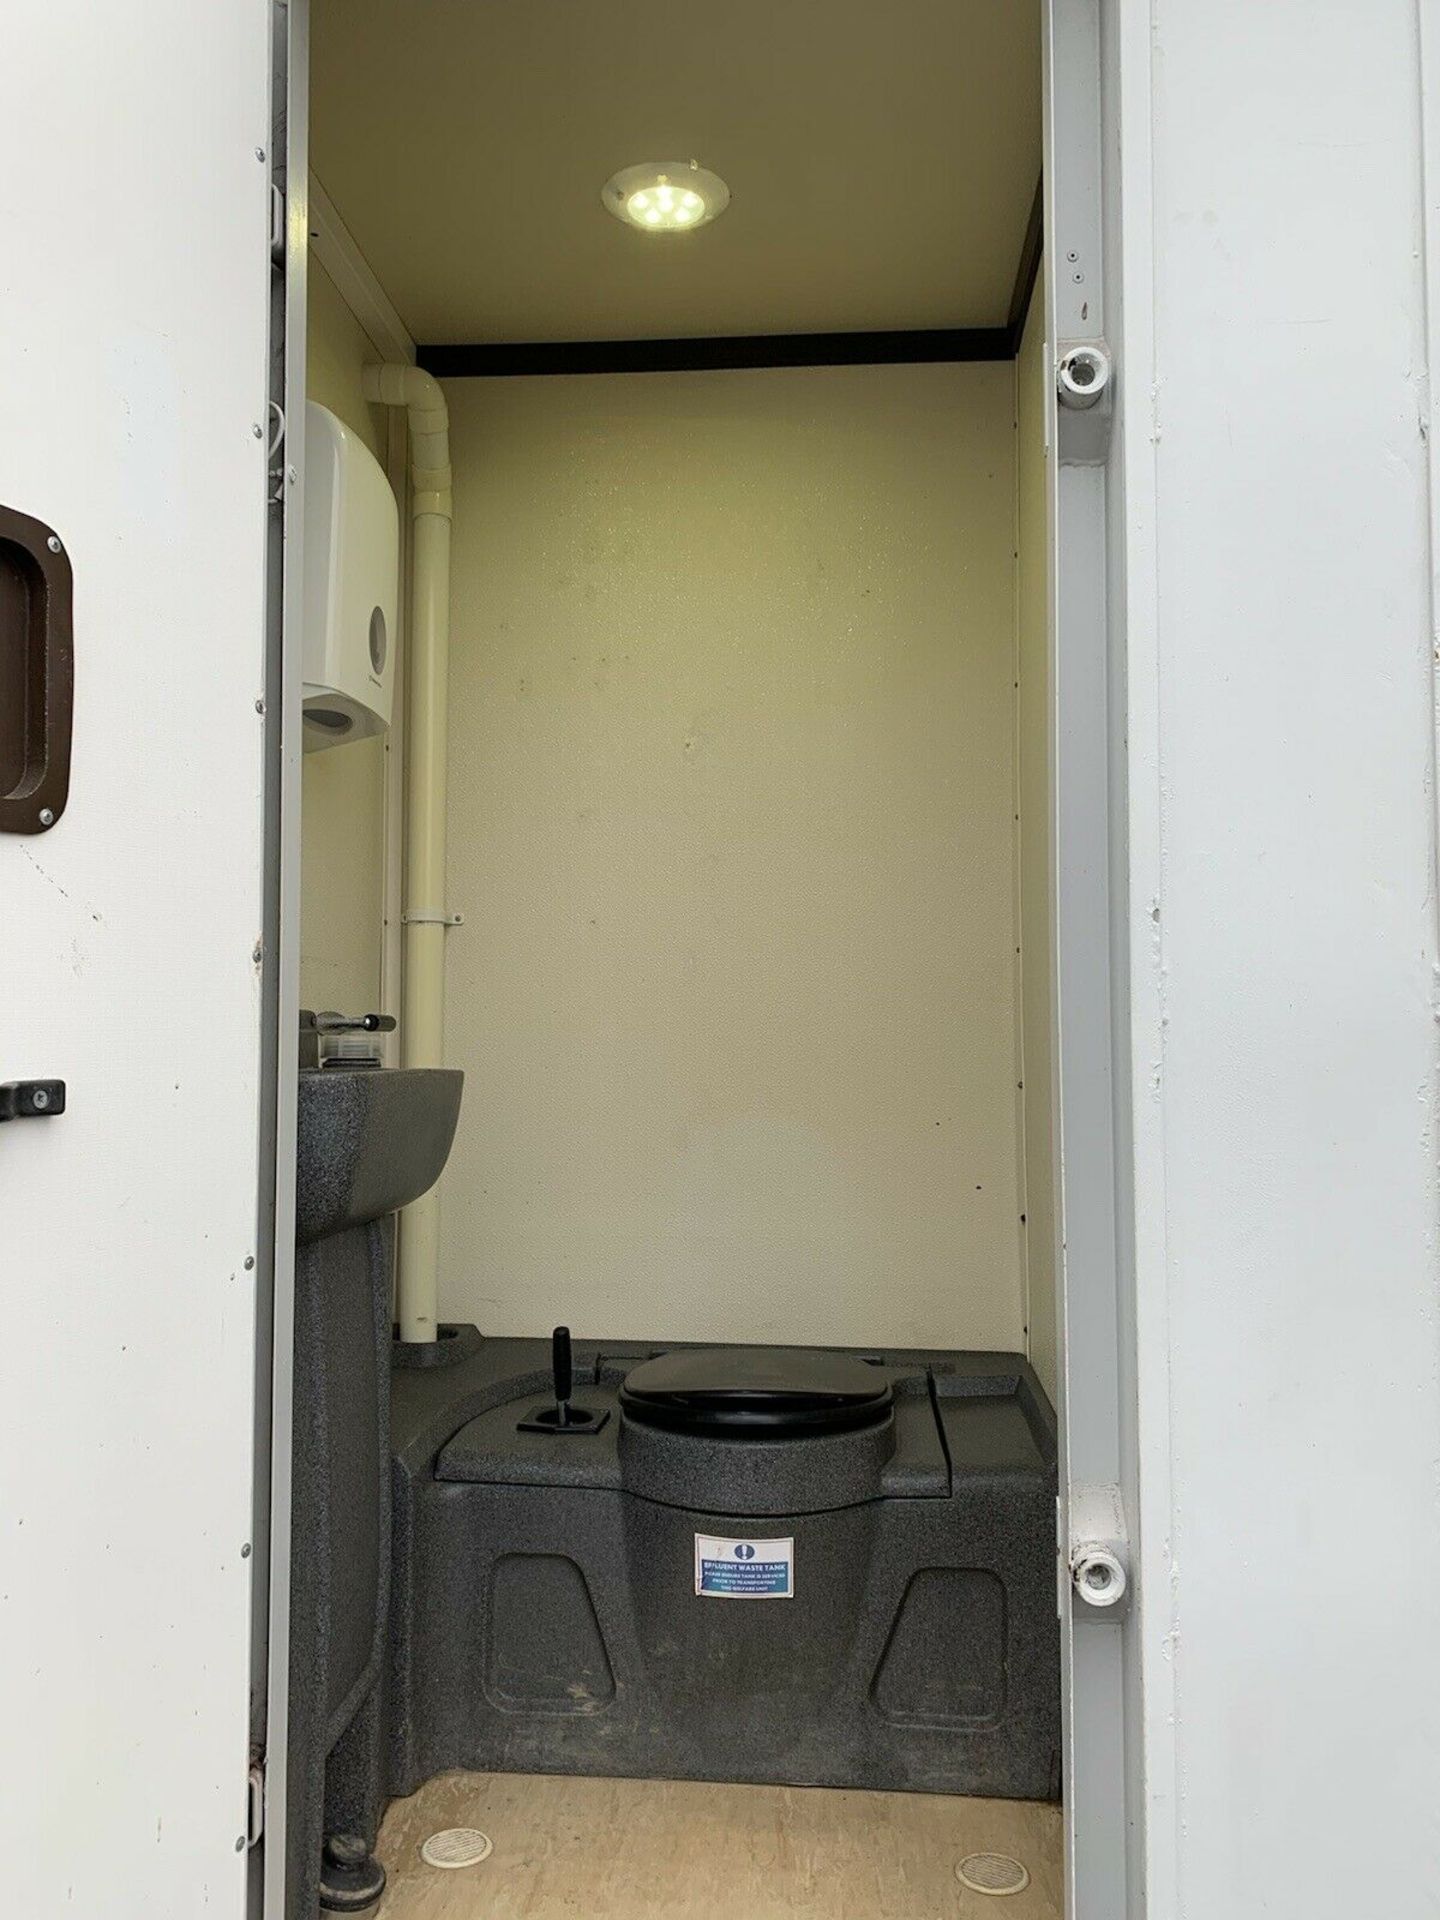 Groundhog Towable Welfare Unit Site Office Canteen - Image 4 of 9